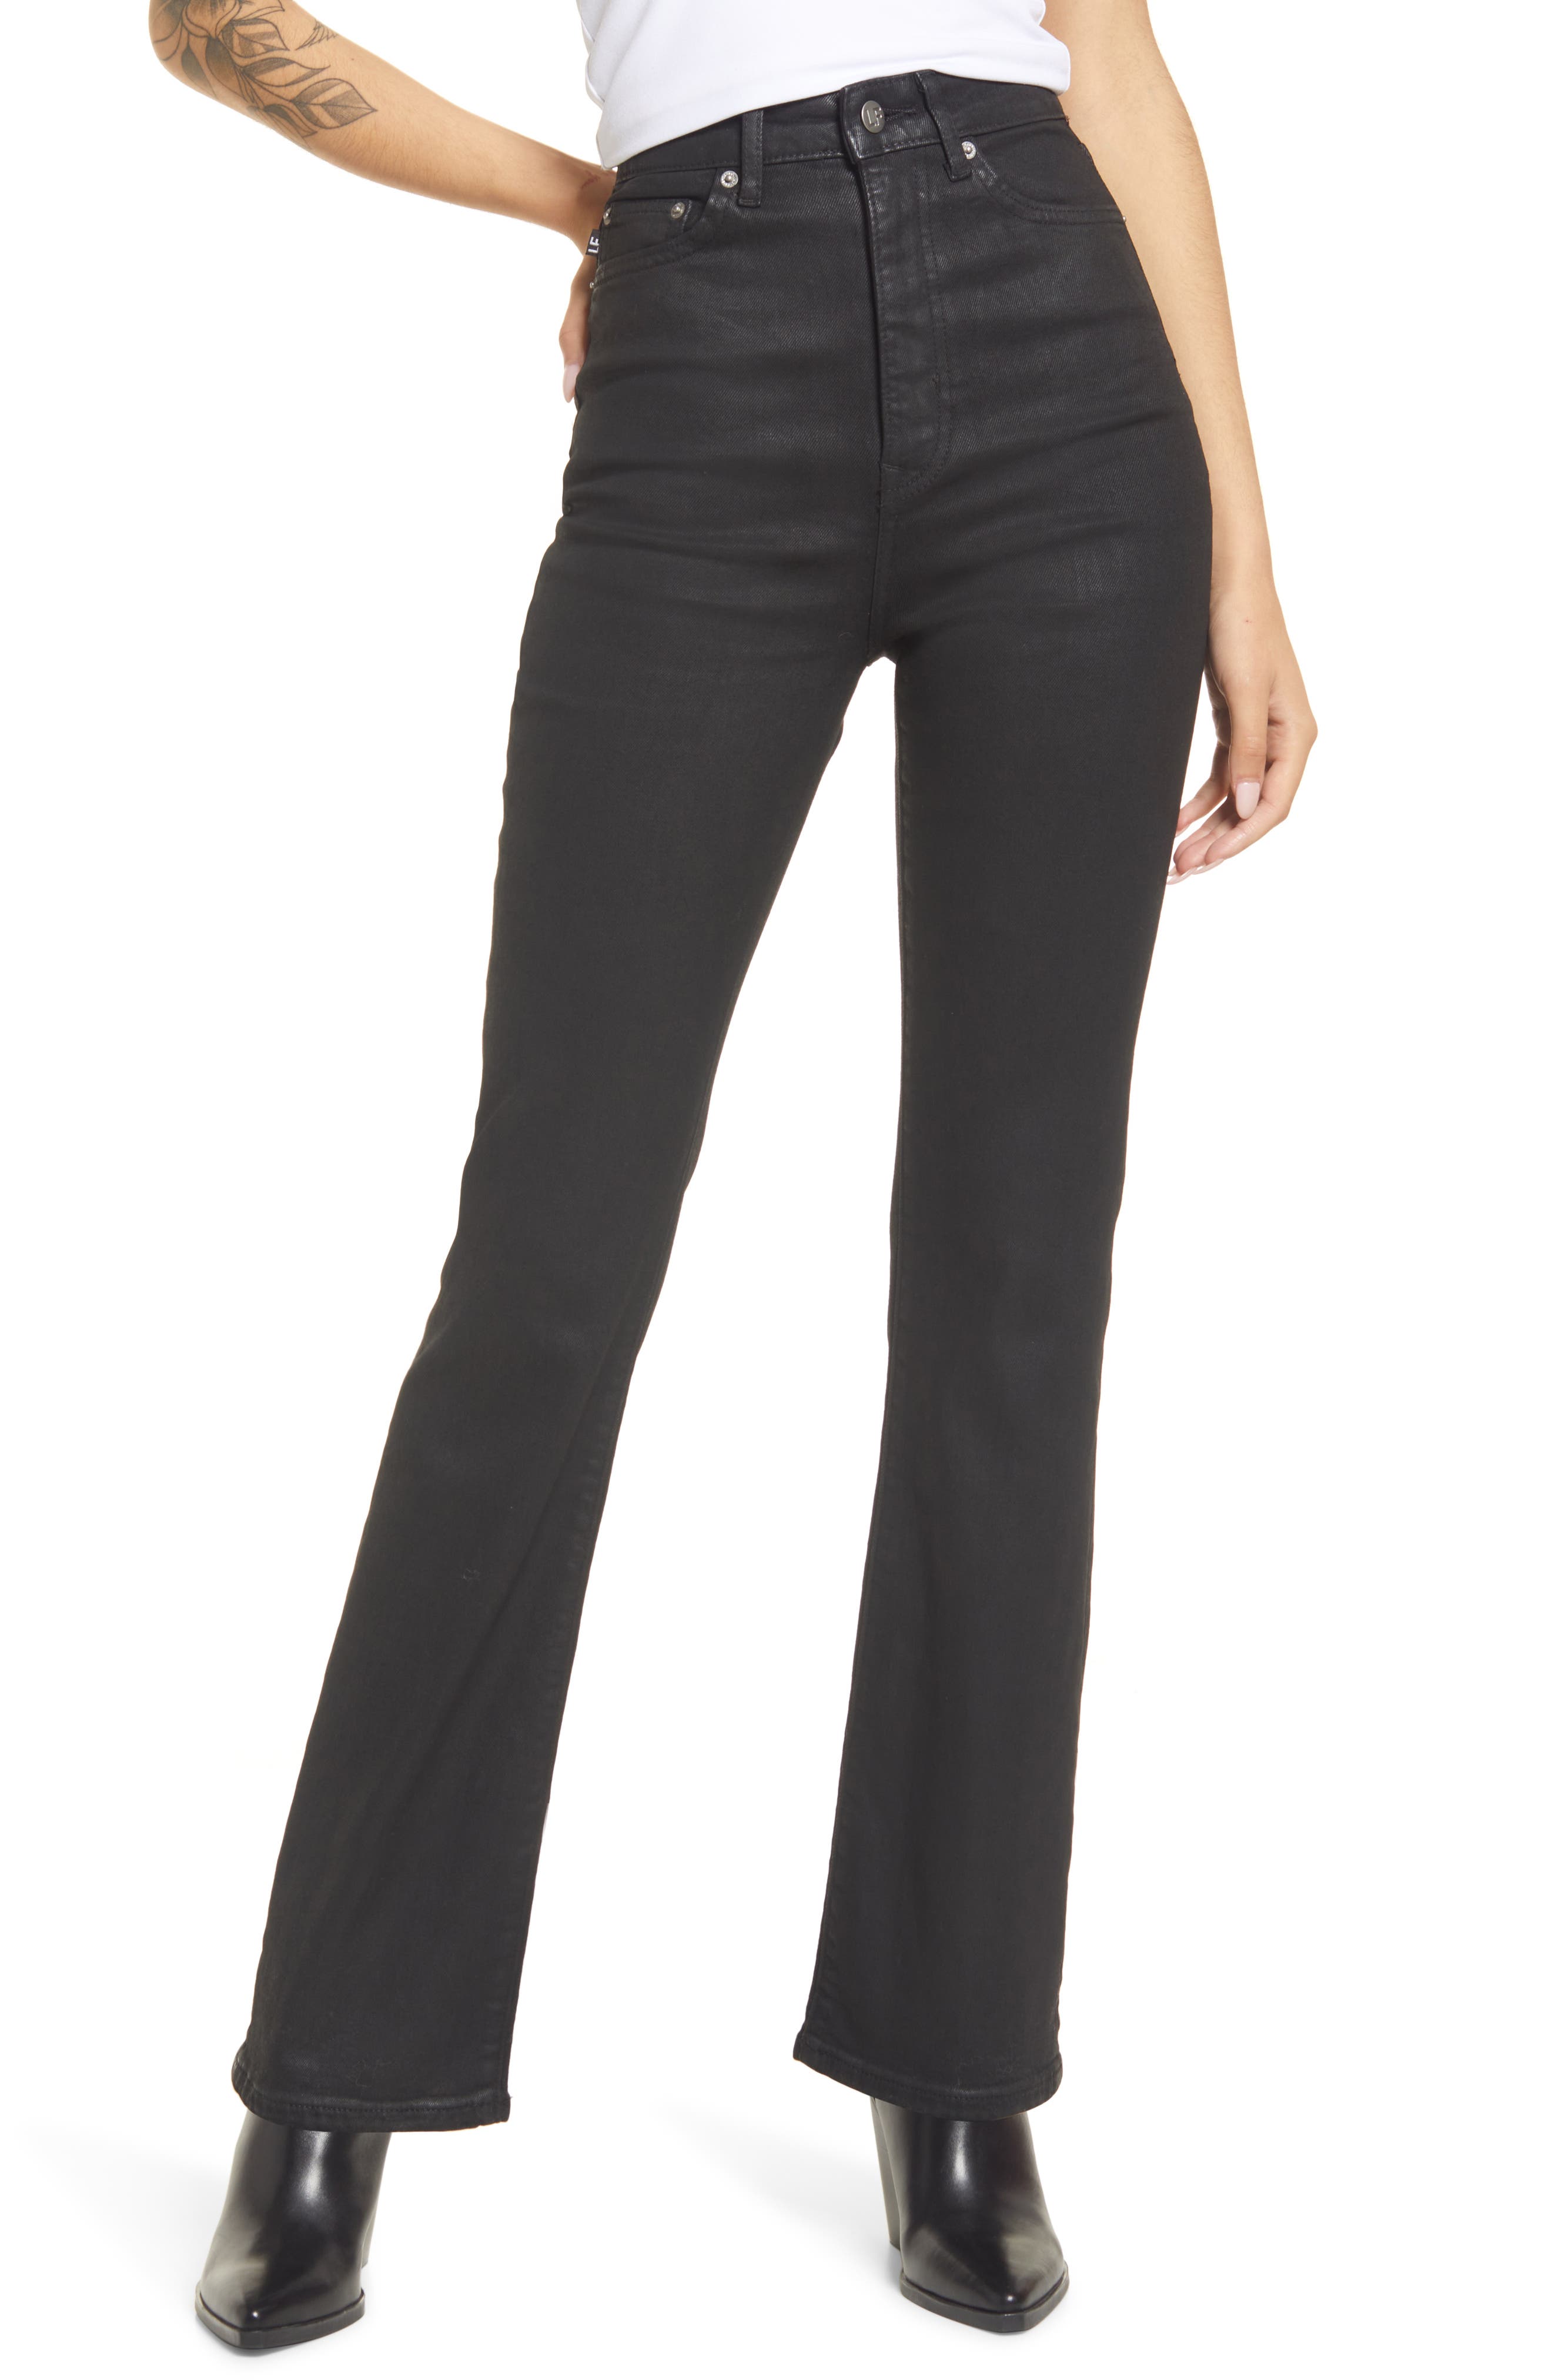 Lovers + Friends Greyson High Rise Slim Bootcut Jeans in Dpwtr